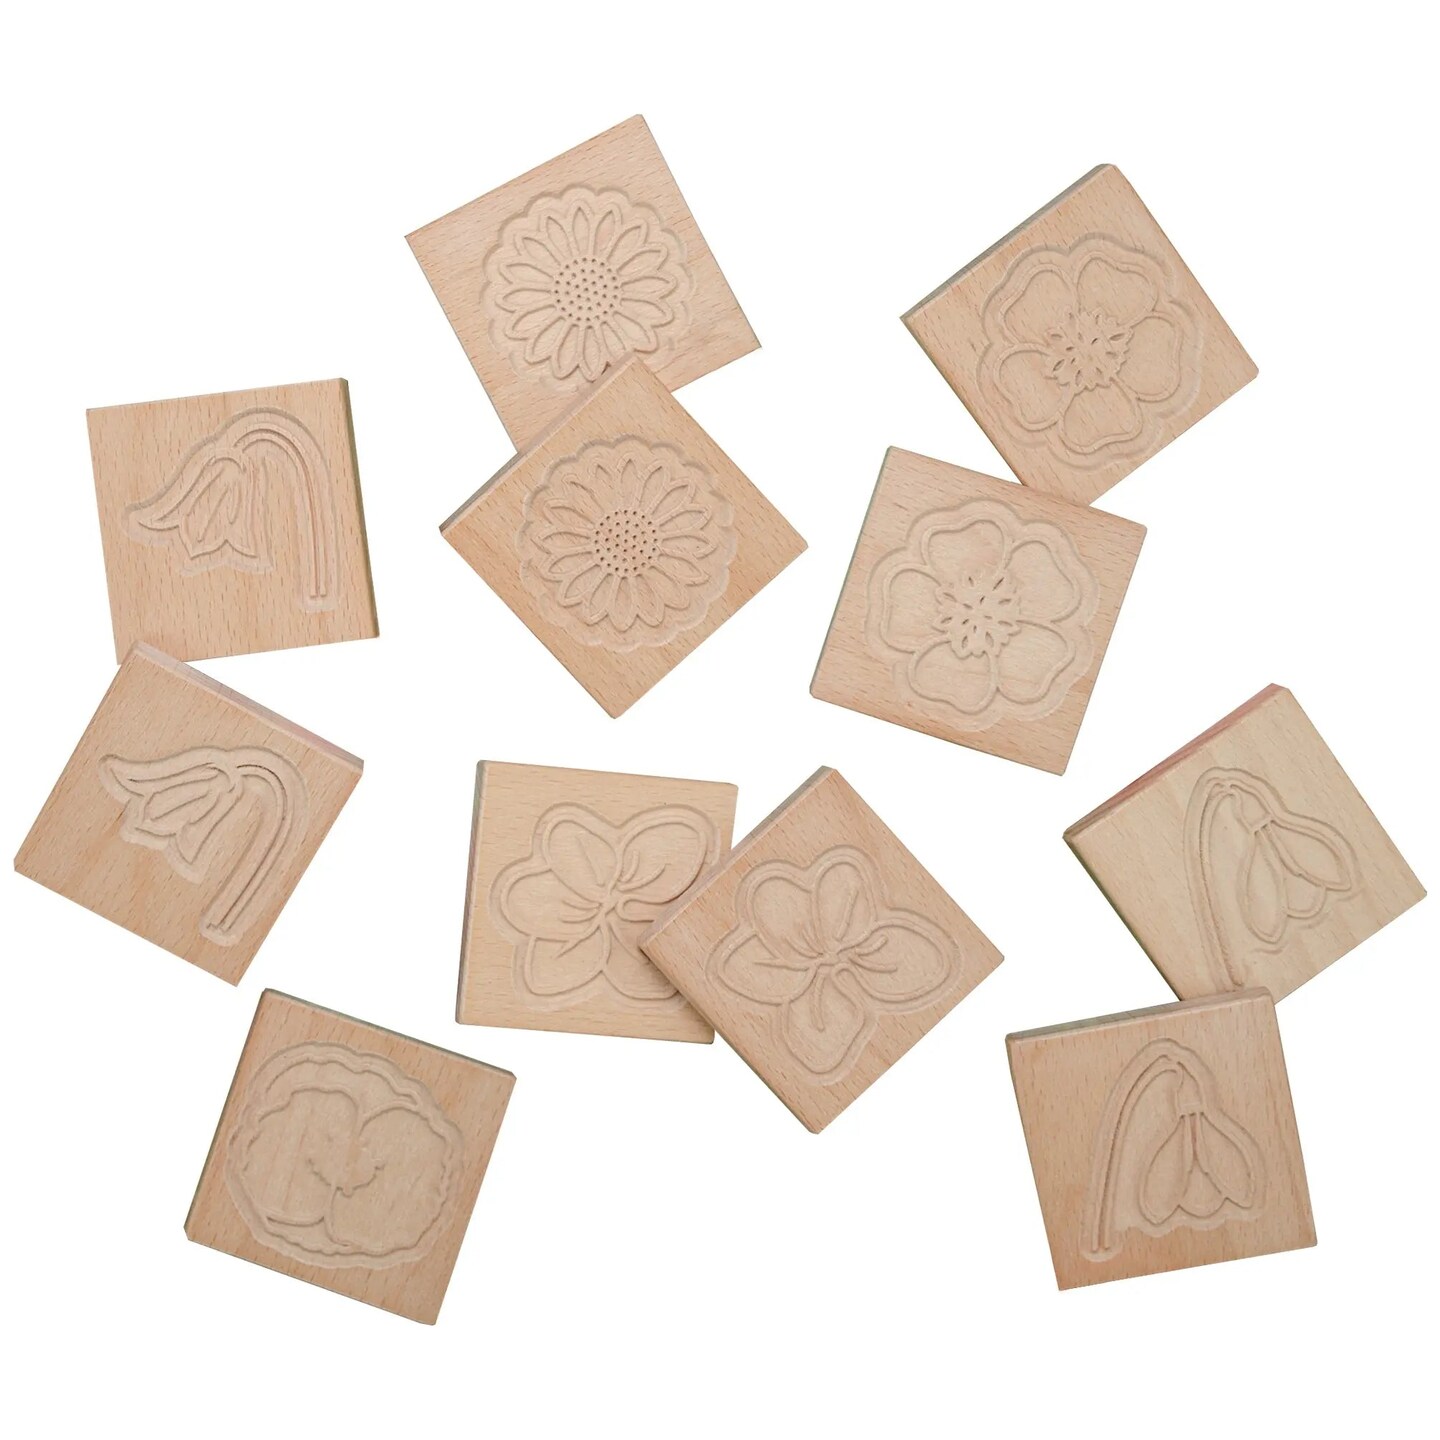 Wooden Tiles for Nature-inspired Play